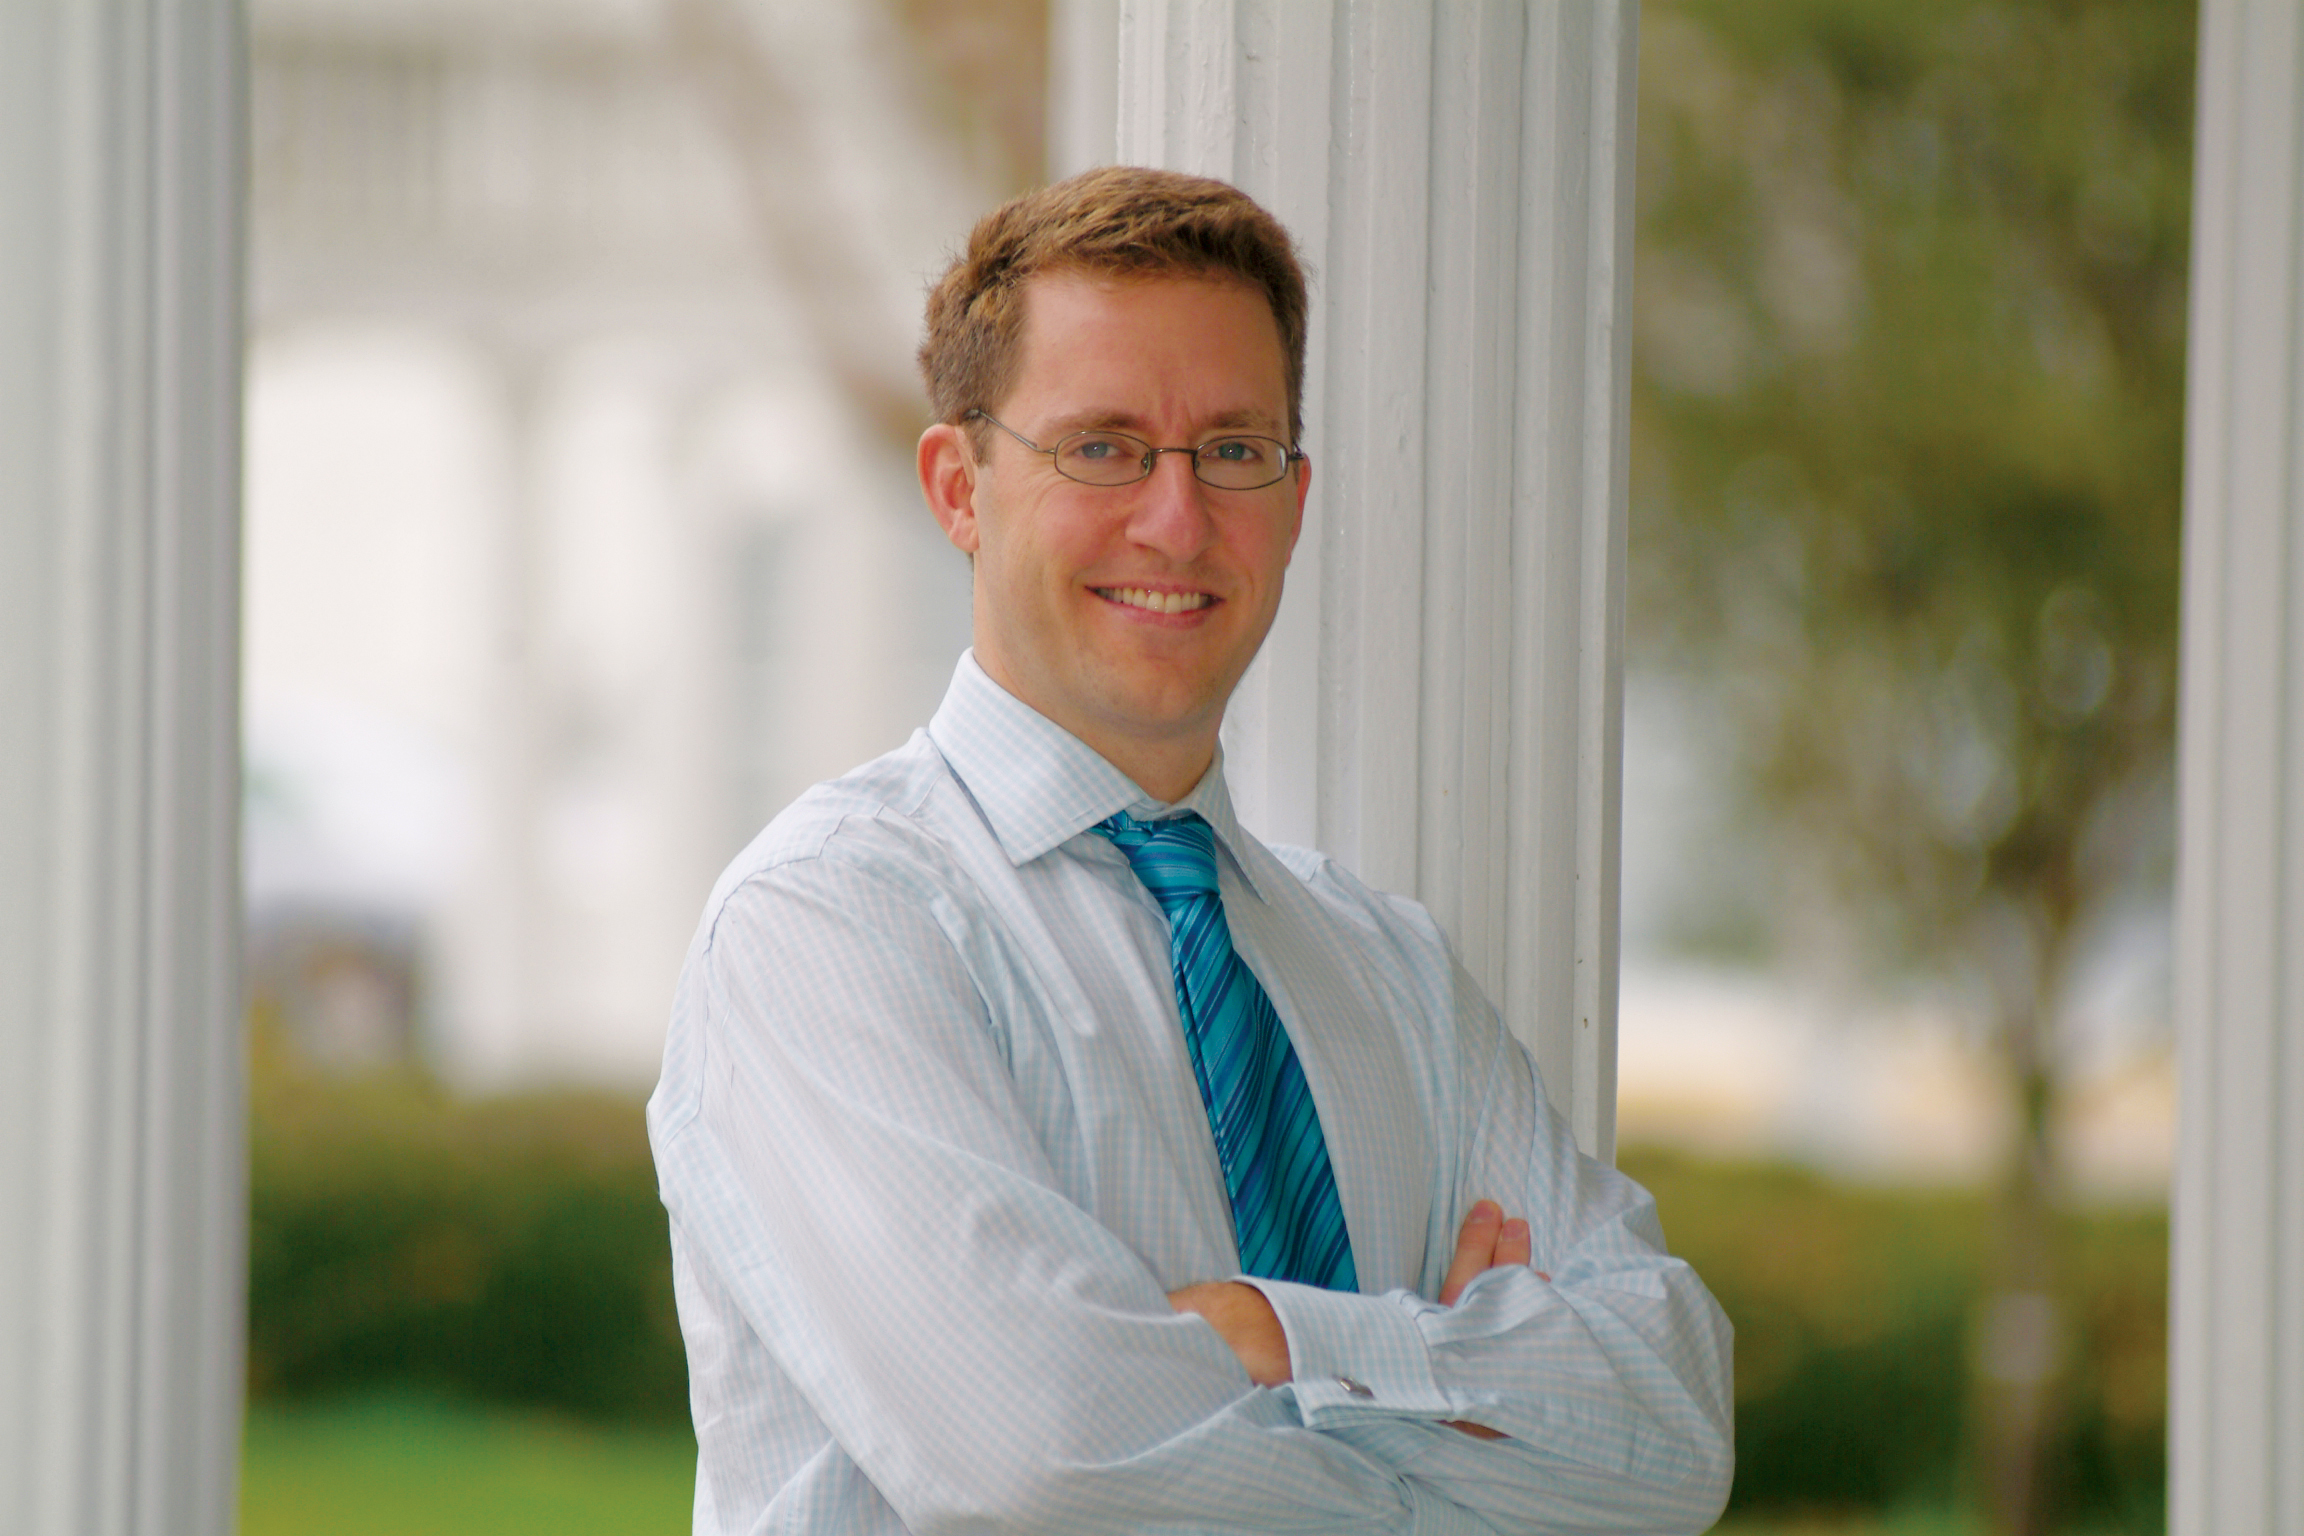 PHOTO: Police are trying to find the person who killed Florida State University law professor Dan Markel, 41.